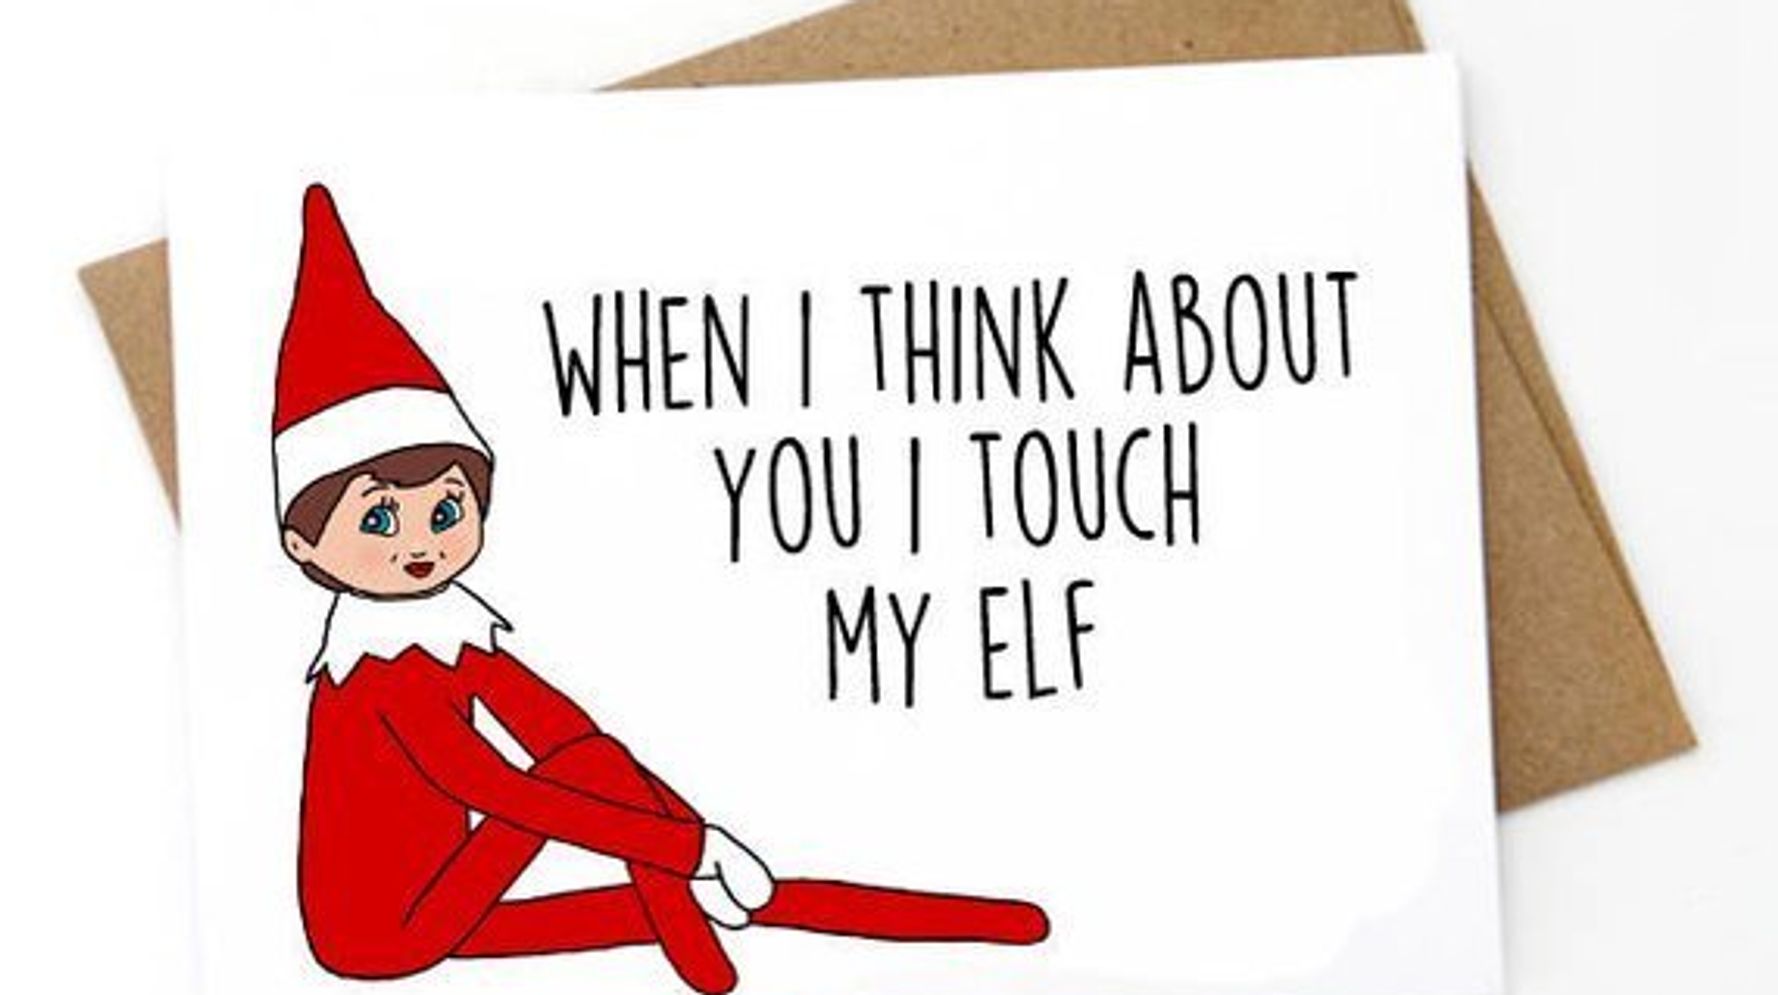 15 Funny Holiday Cards For Couples With A Sense Of Humor.